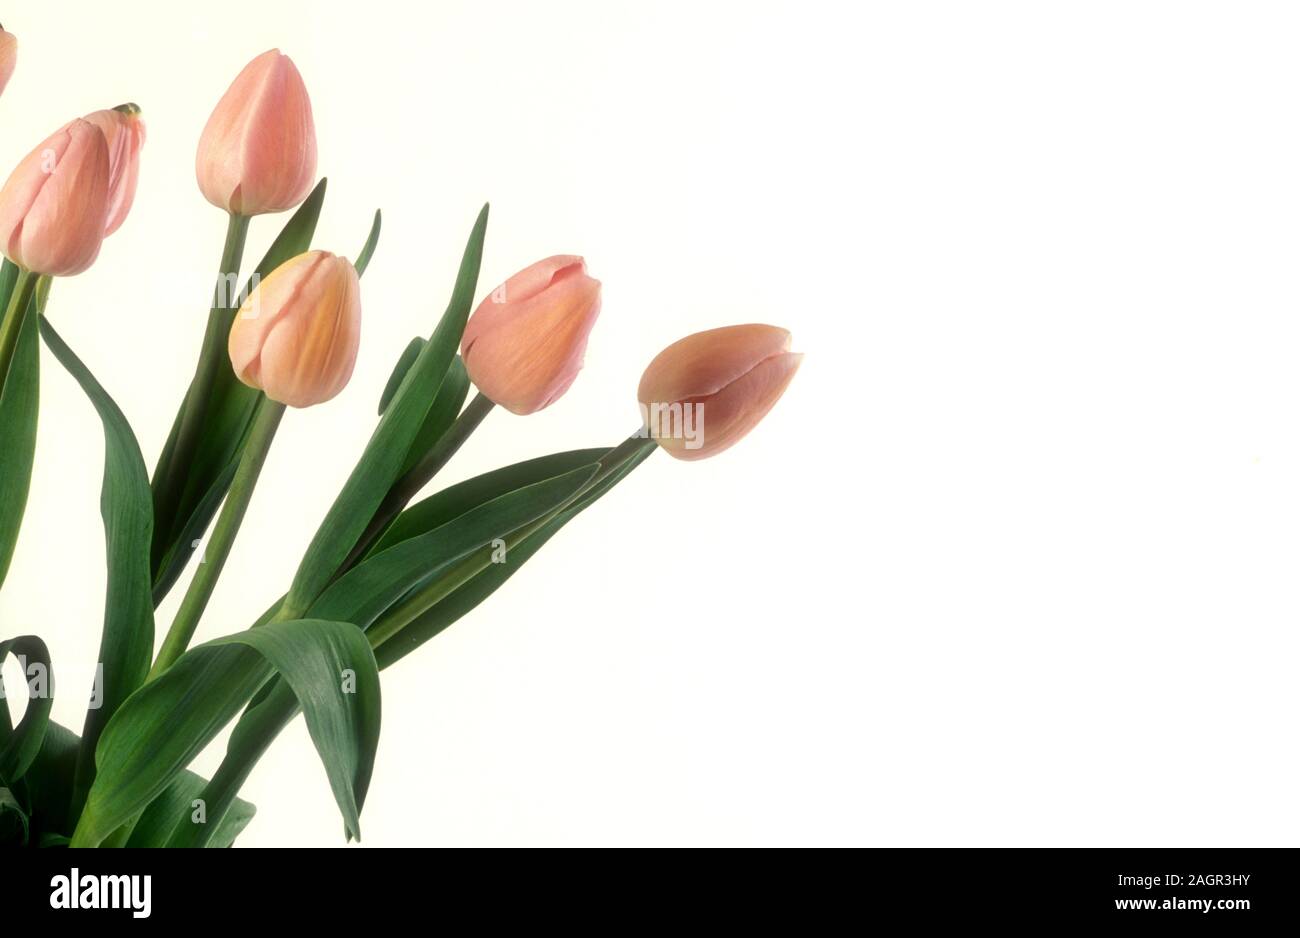 STUDIO IMAGES OF CUT PALE PINK TULIPS (TULIPA) ON WHITE BACKGROUND. Stock Photo